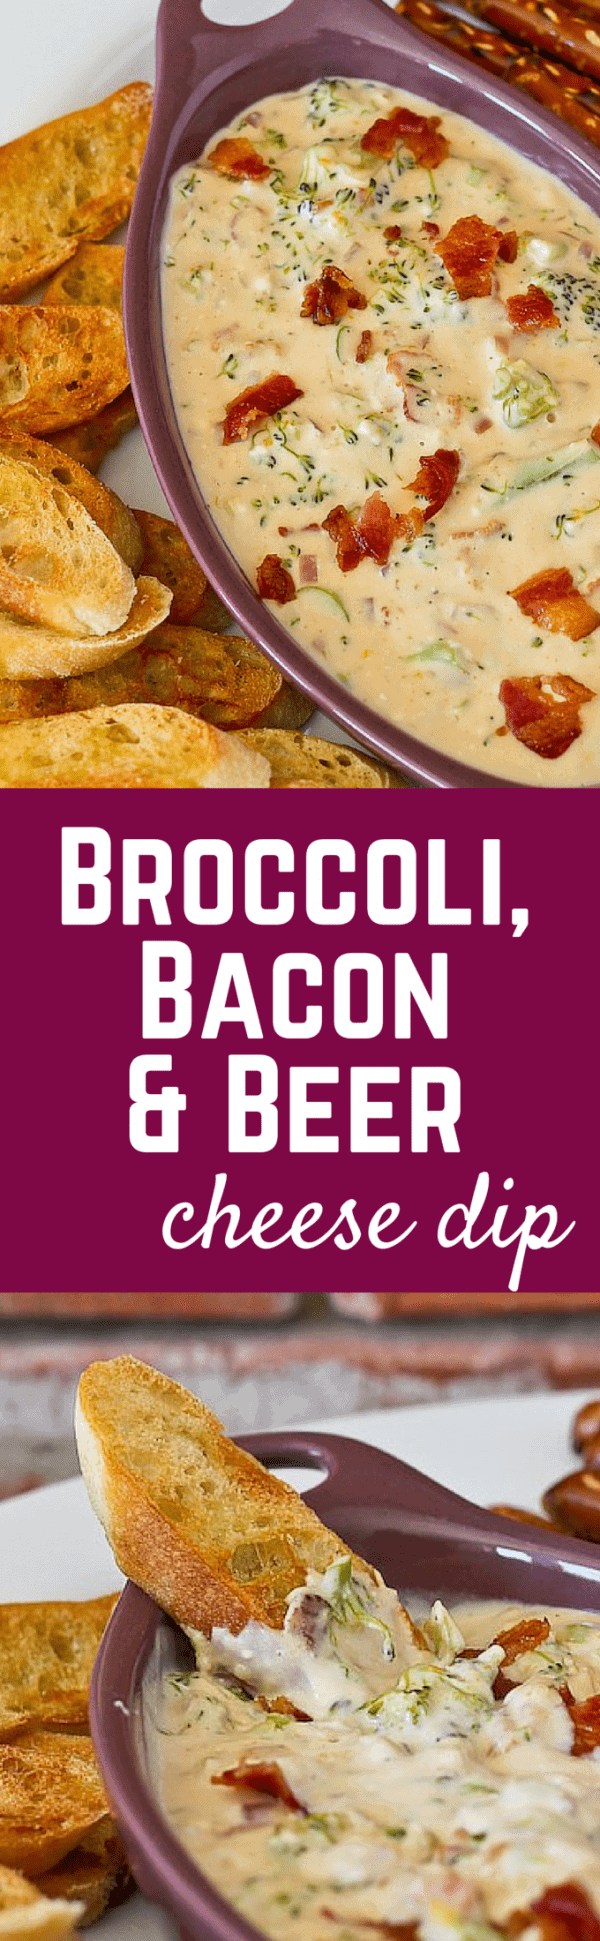 This Broccoli, Bacon, and Beer Cheese Dip will be the hit of any party! Get the easy recipe on RachelCooks.com!